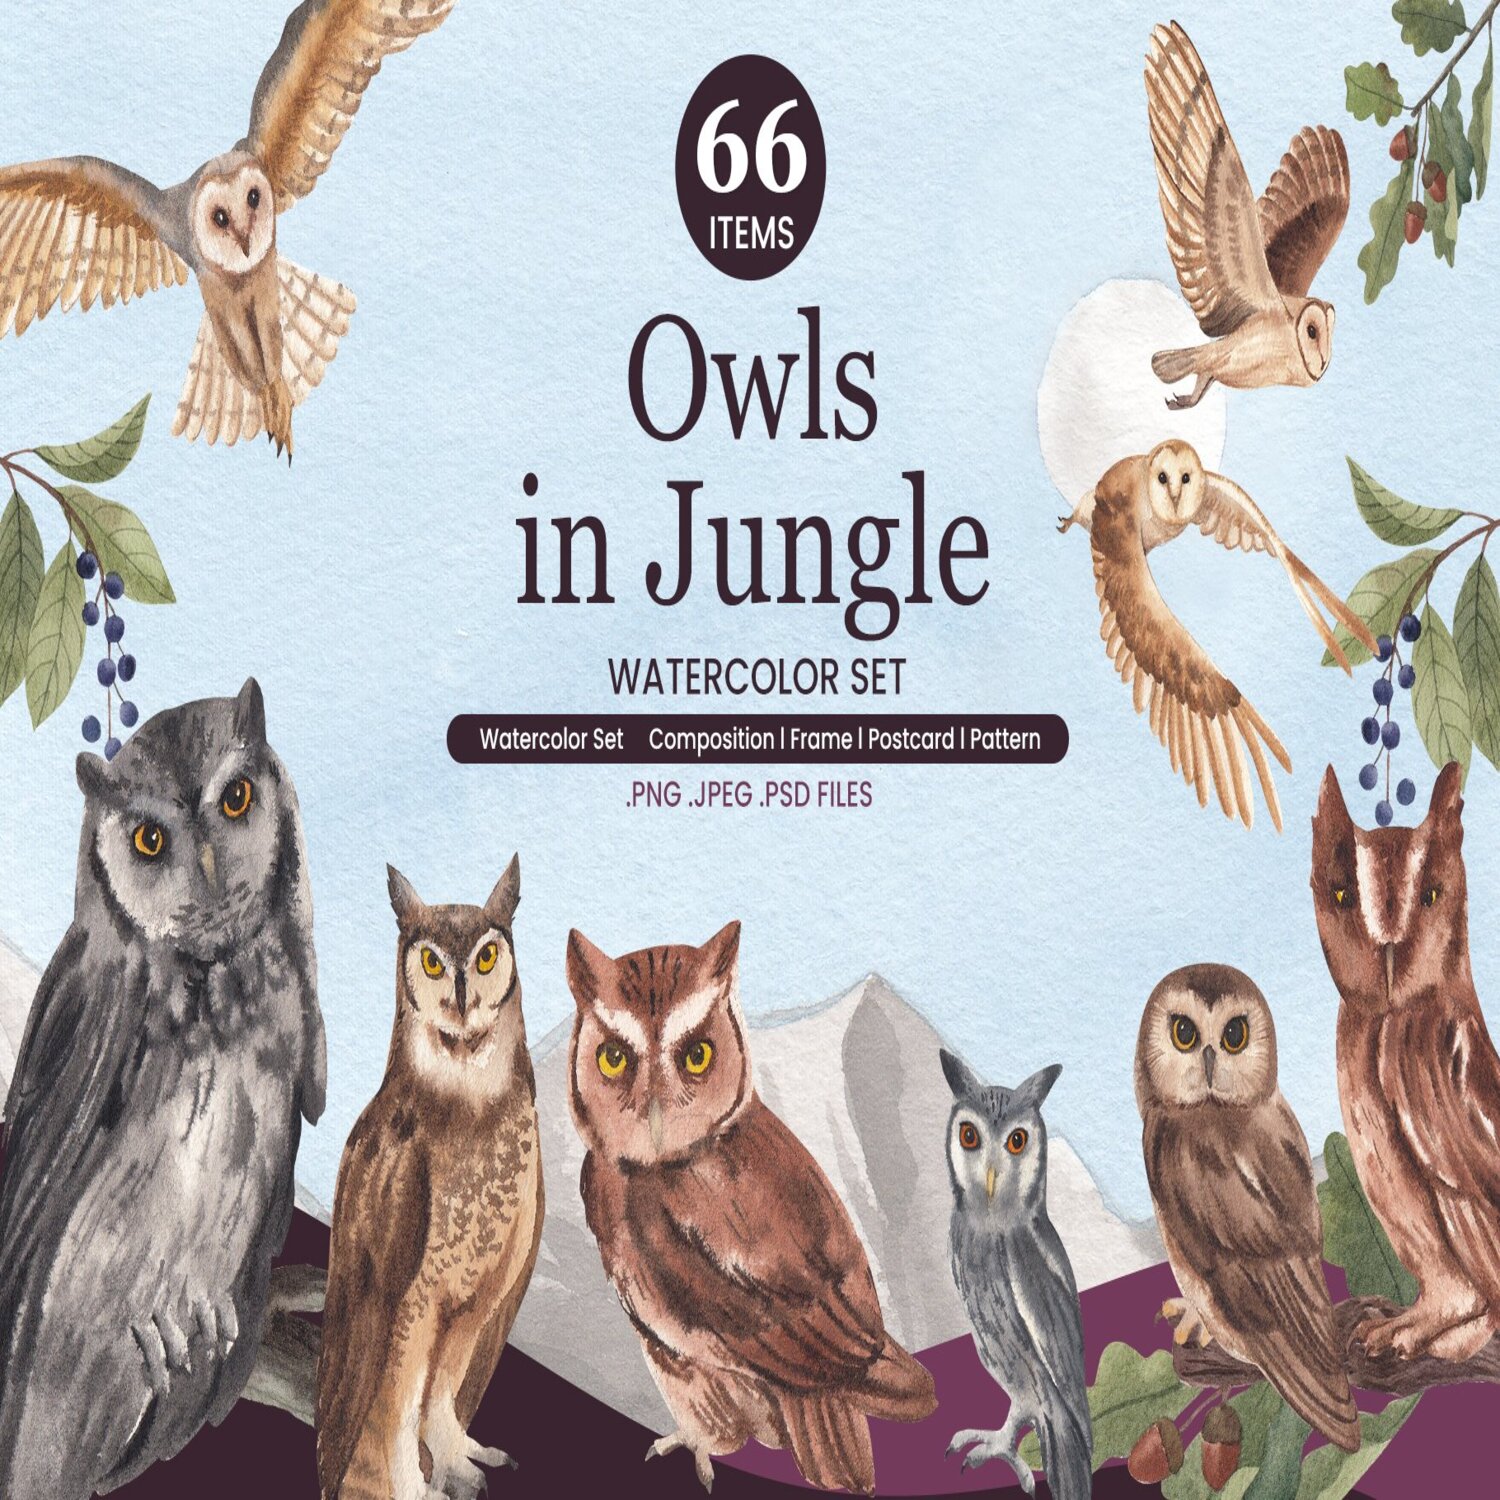 Owls in Jungle Watercolor cover.